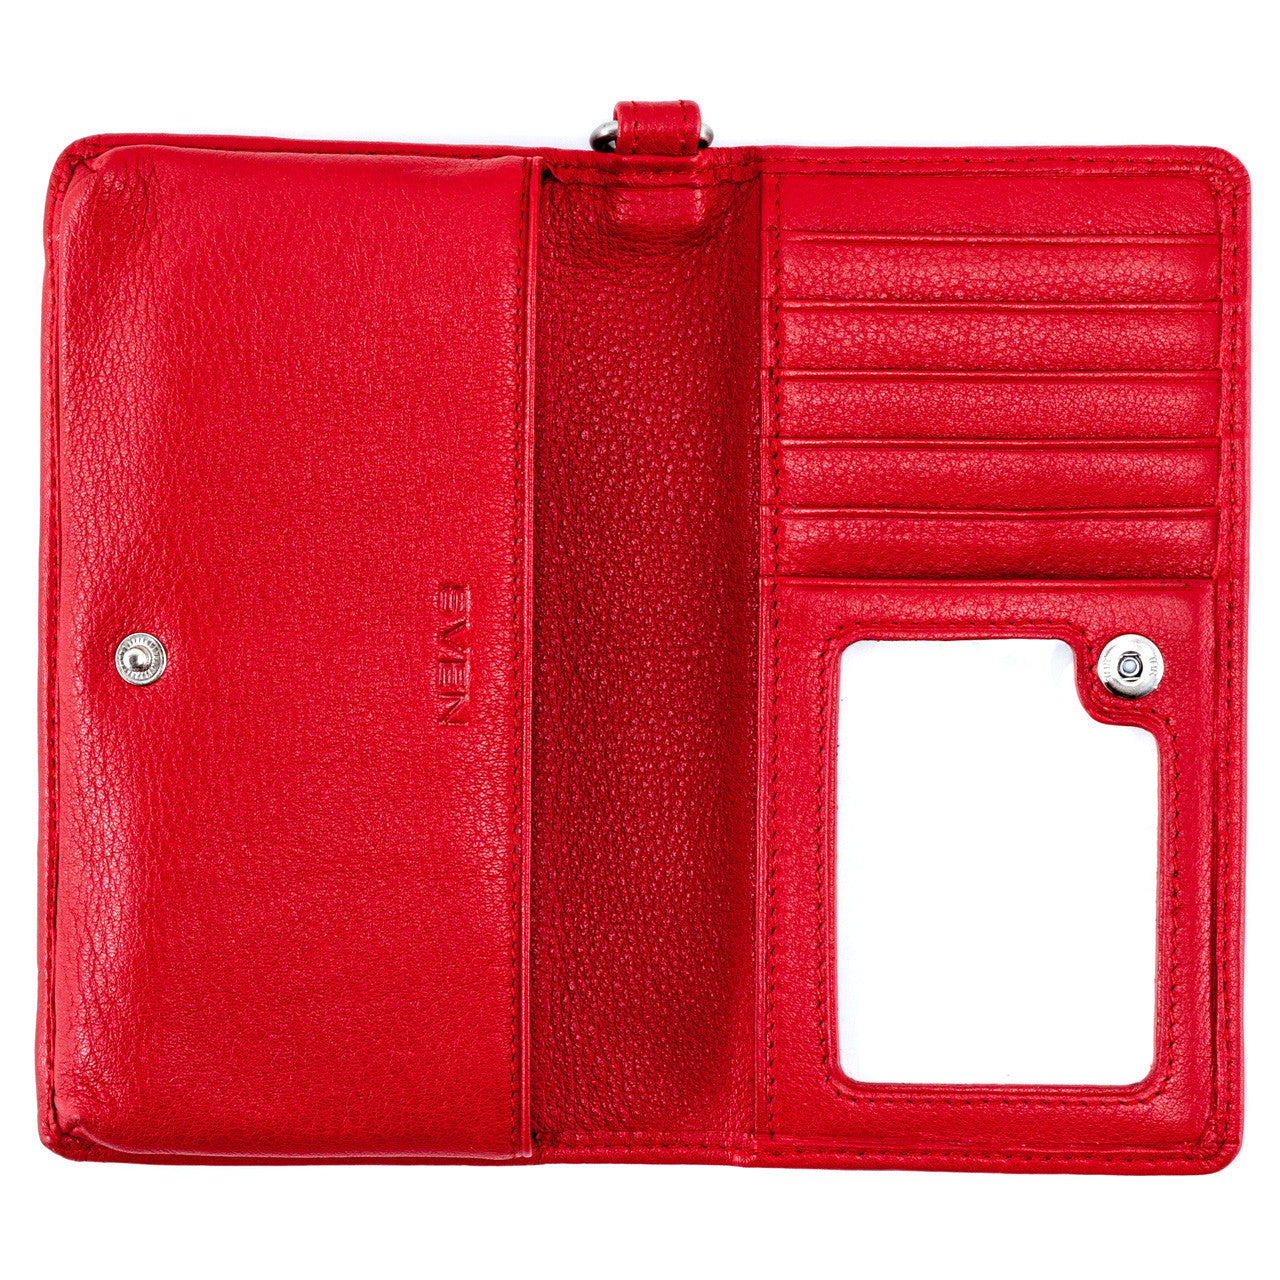 SVEN Style No. W51 Wristlet/Cell Phone Wallet red leather